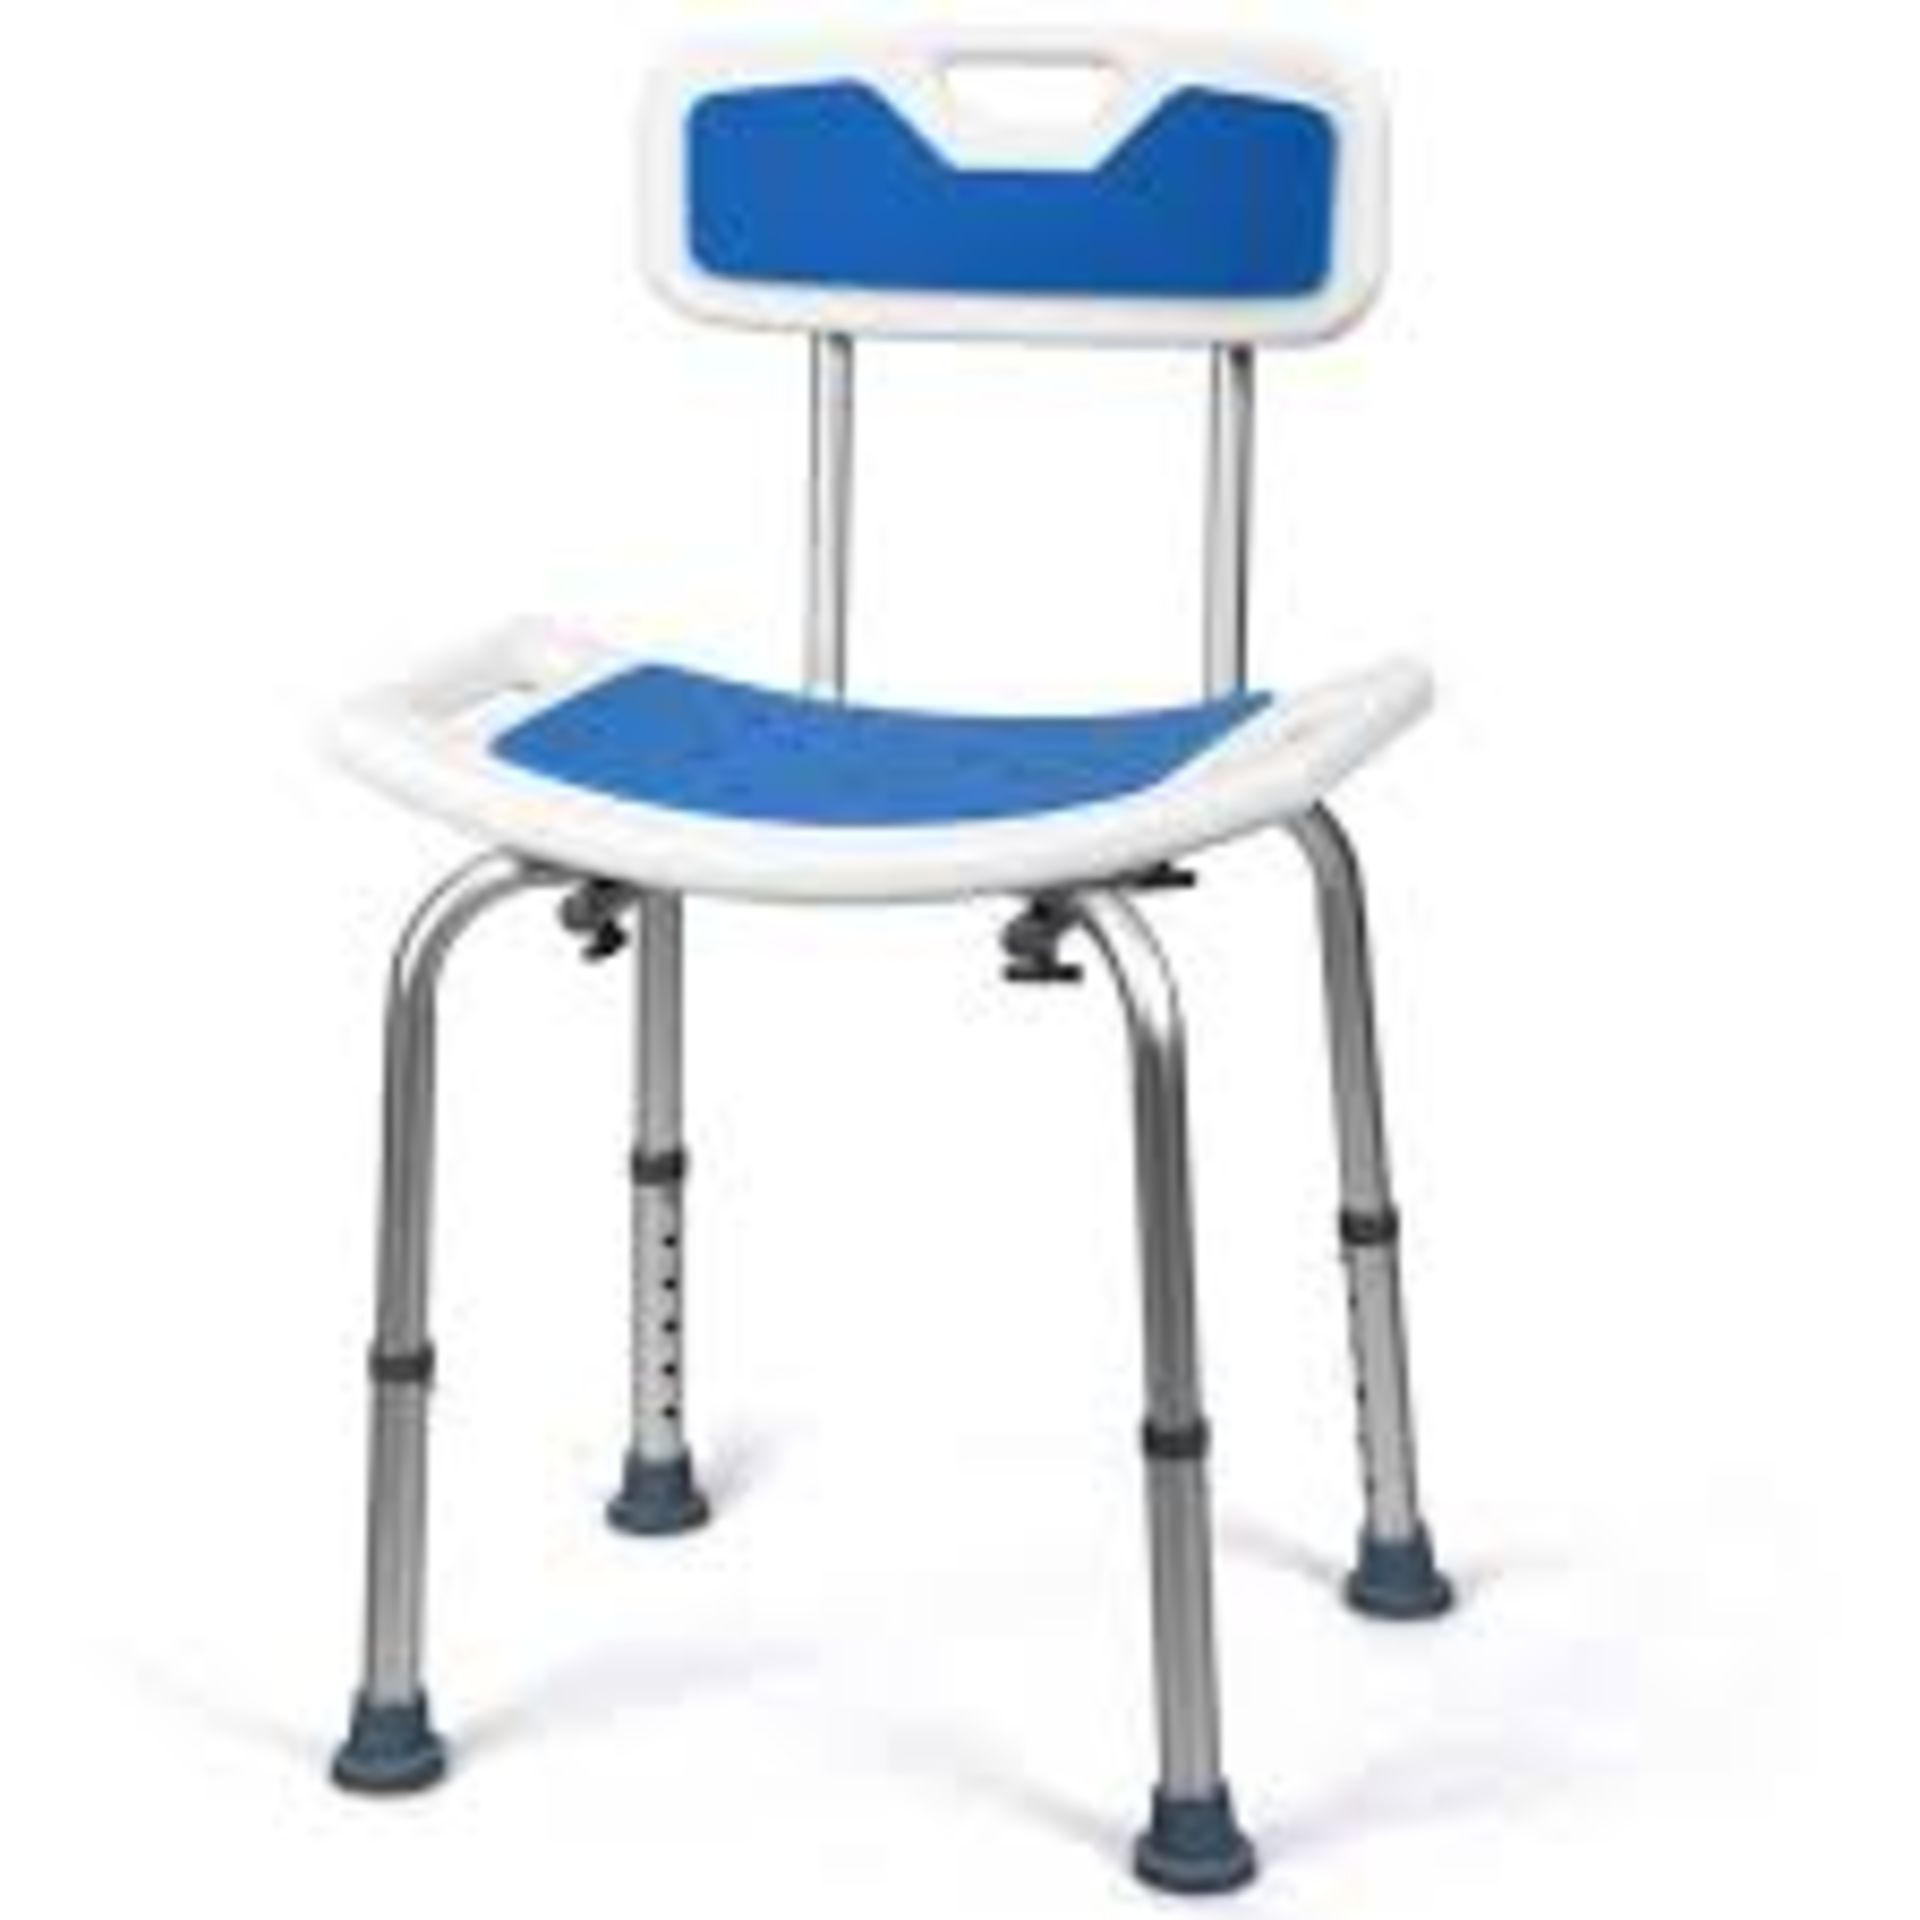 Height Adjustable Shower Chair. - R14.15. Make your daily routine more comfortable and much safer